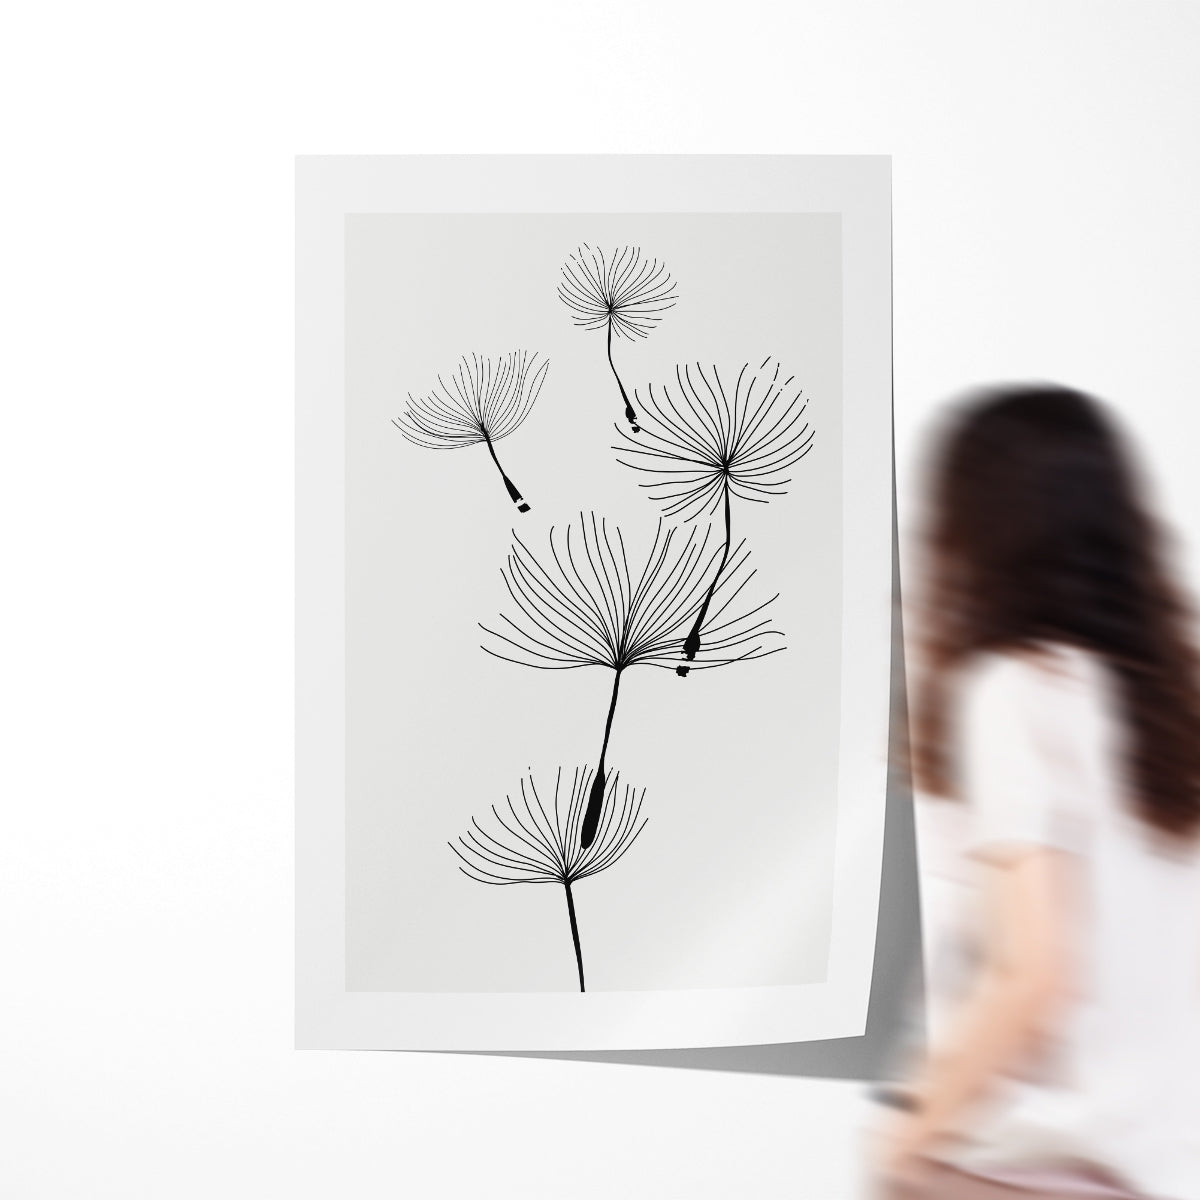 Dandelion Seed Abstract Minimalist Poster Wall Art-Vertical Posters NOT FRAMED-CetArt-8″x10″ inches-CetArt